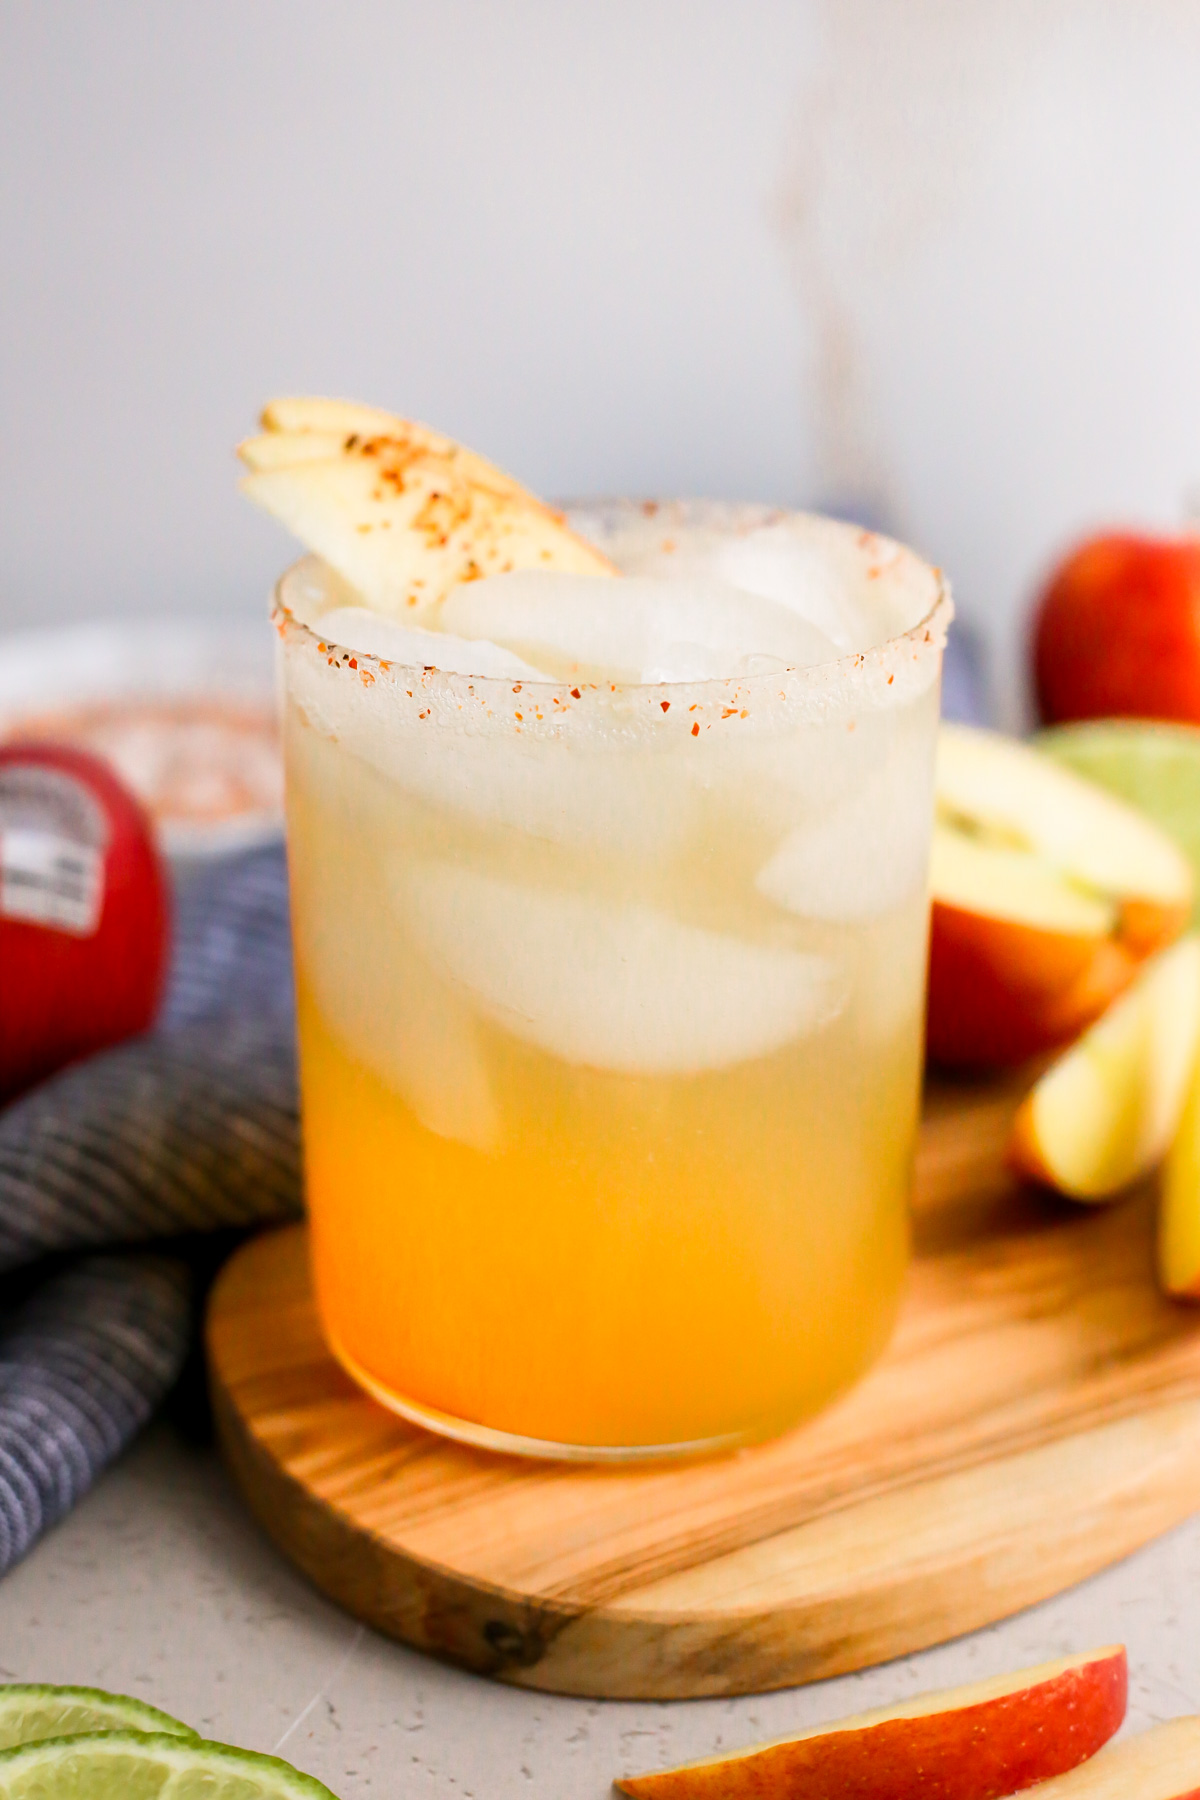 An apple margarita mocktail is displayed on a wooden serving tray on a kitchen countertop